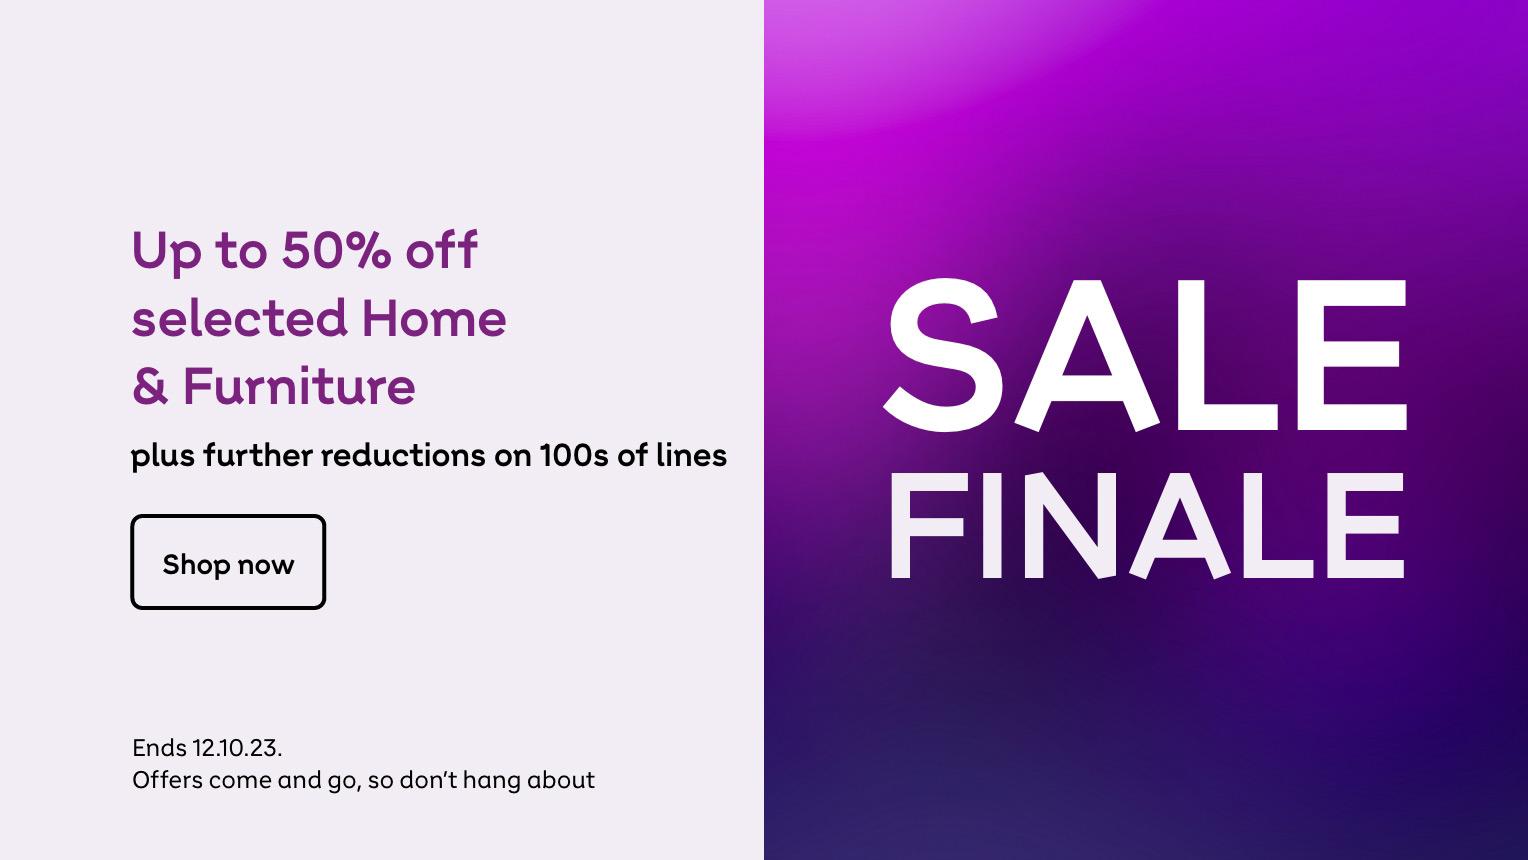 Up to 50% off selected Home & Furniture